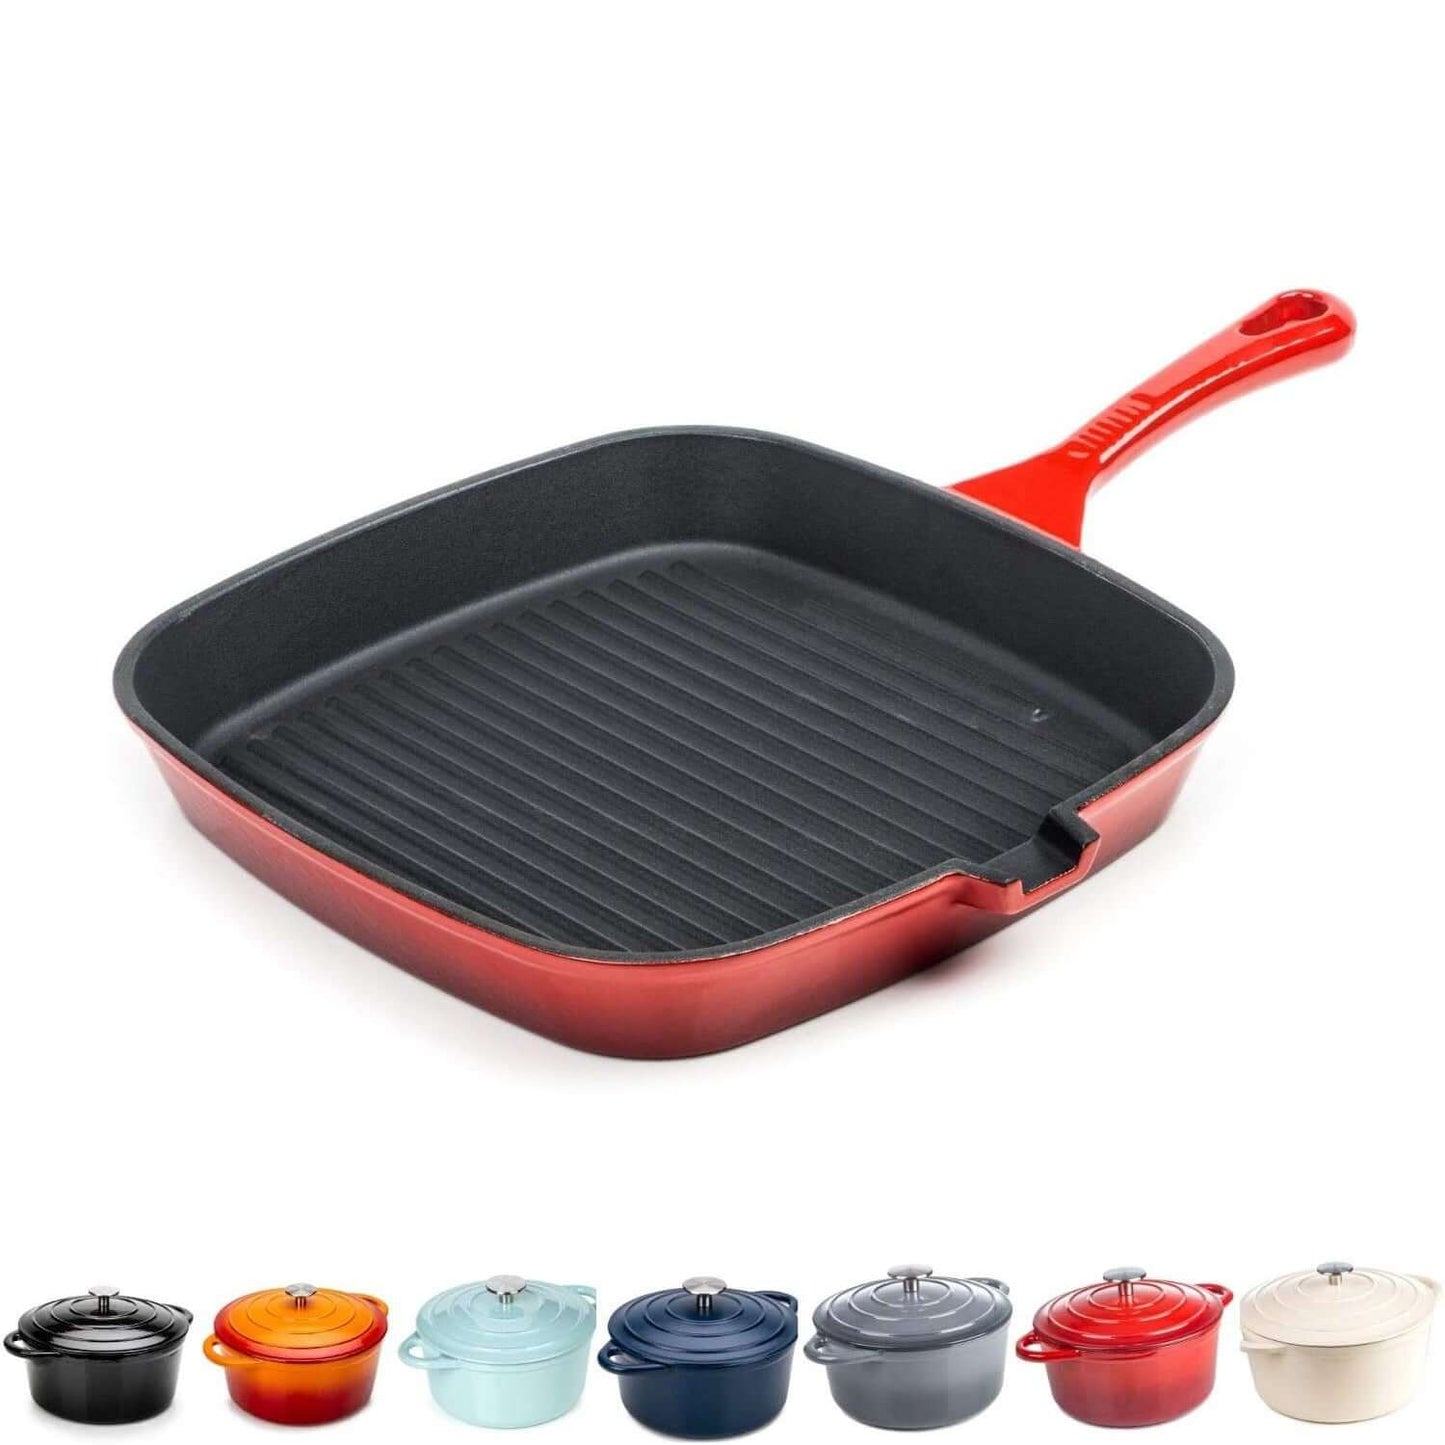 23.5cm Red Grill Griddle Pan Cast Iron Square Frying Pan Induction and Gas 10 Yr Guarantee